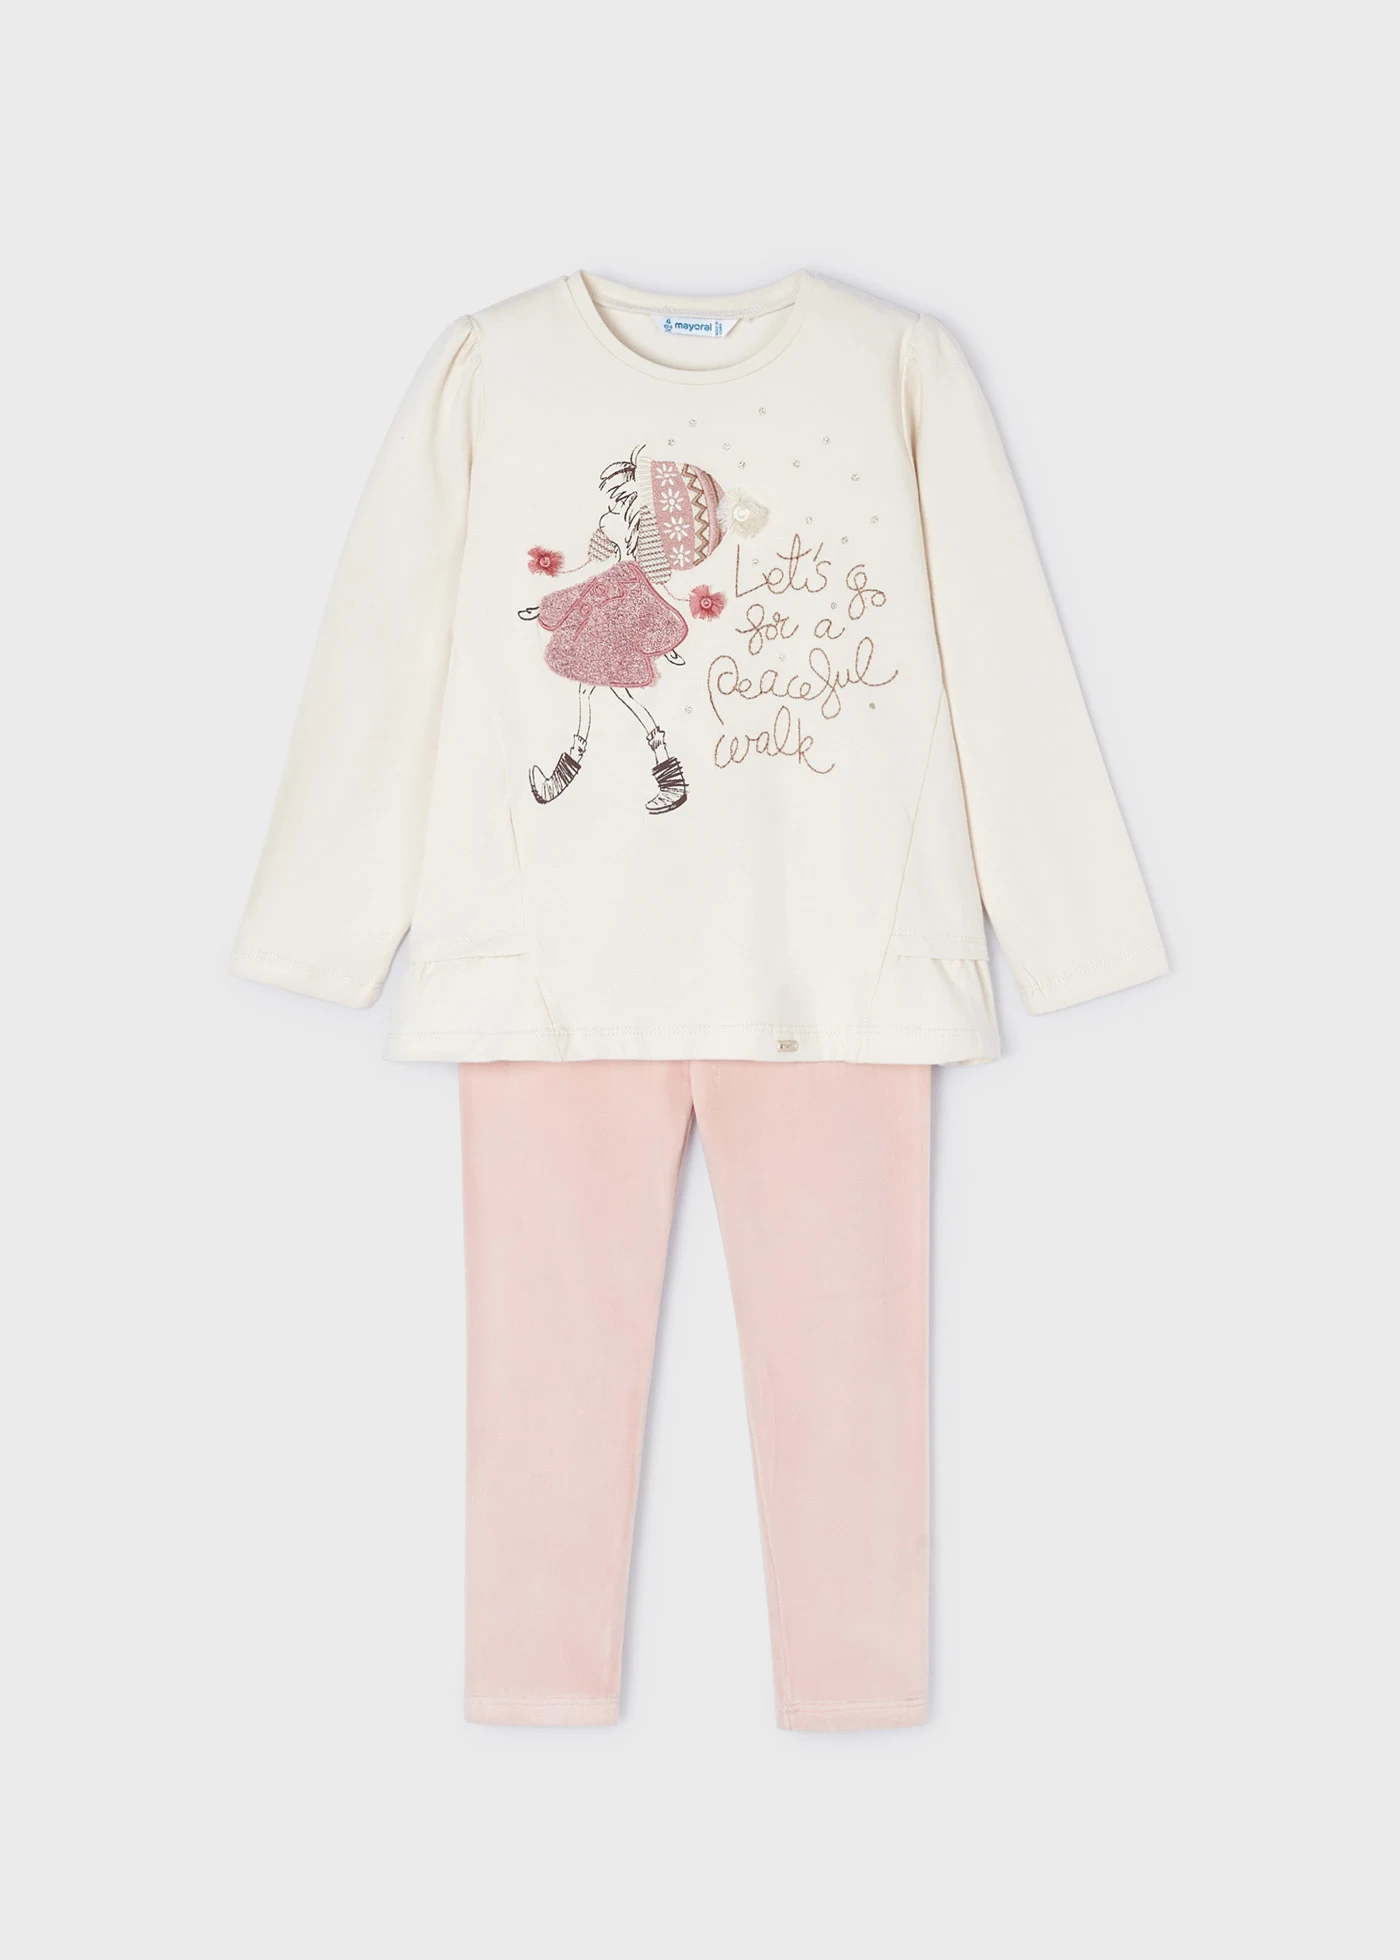 Mayoral Two-Piece Top & Velvet Leggings Set Style 4785 - Nude - £37.00 :  Greenswear, Greenswear - Childrens fashion and schoolwear